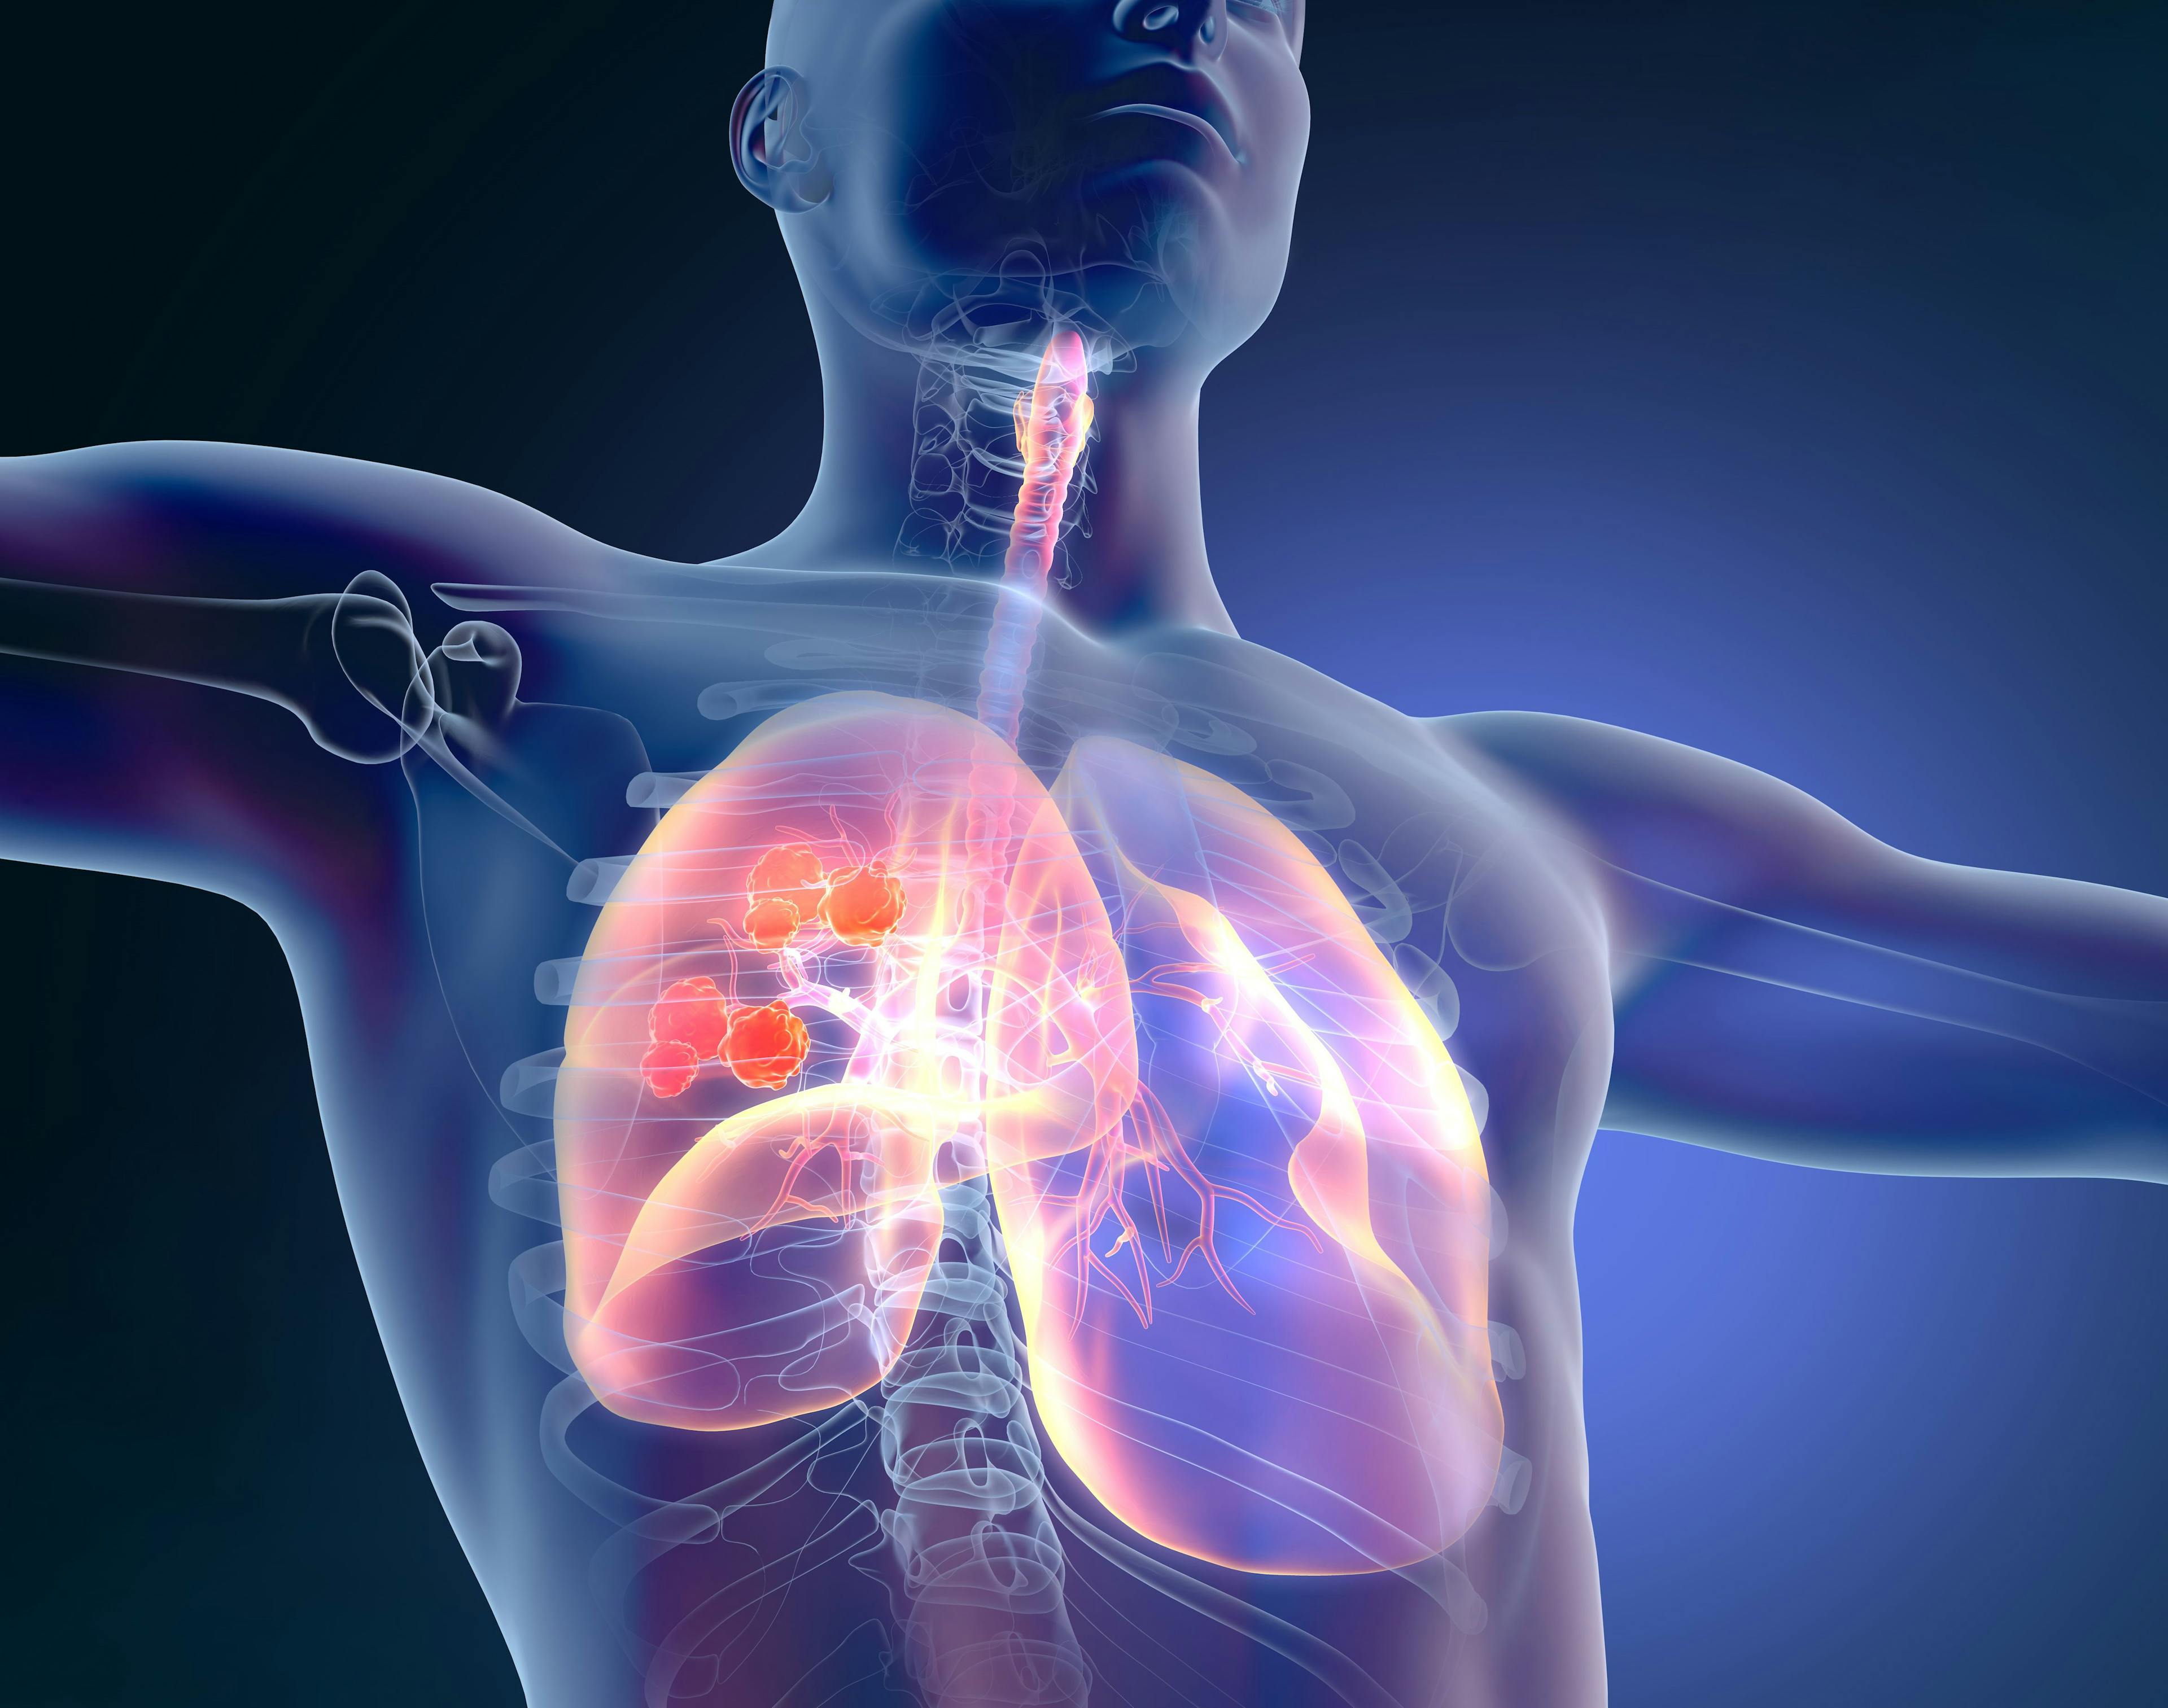 FDA Grants Priority Review to Atezolizumab for the Treatment of Non–Small Cell Lung Cancer